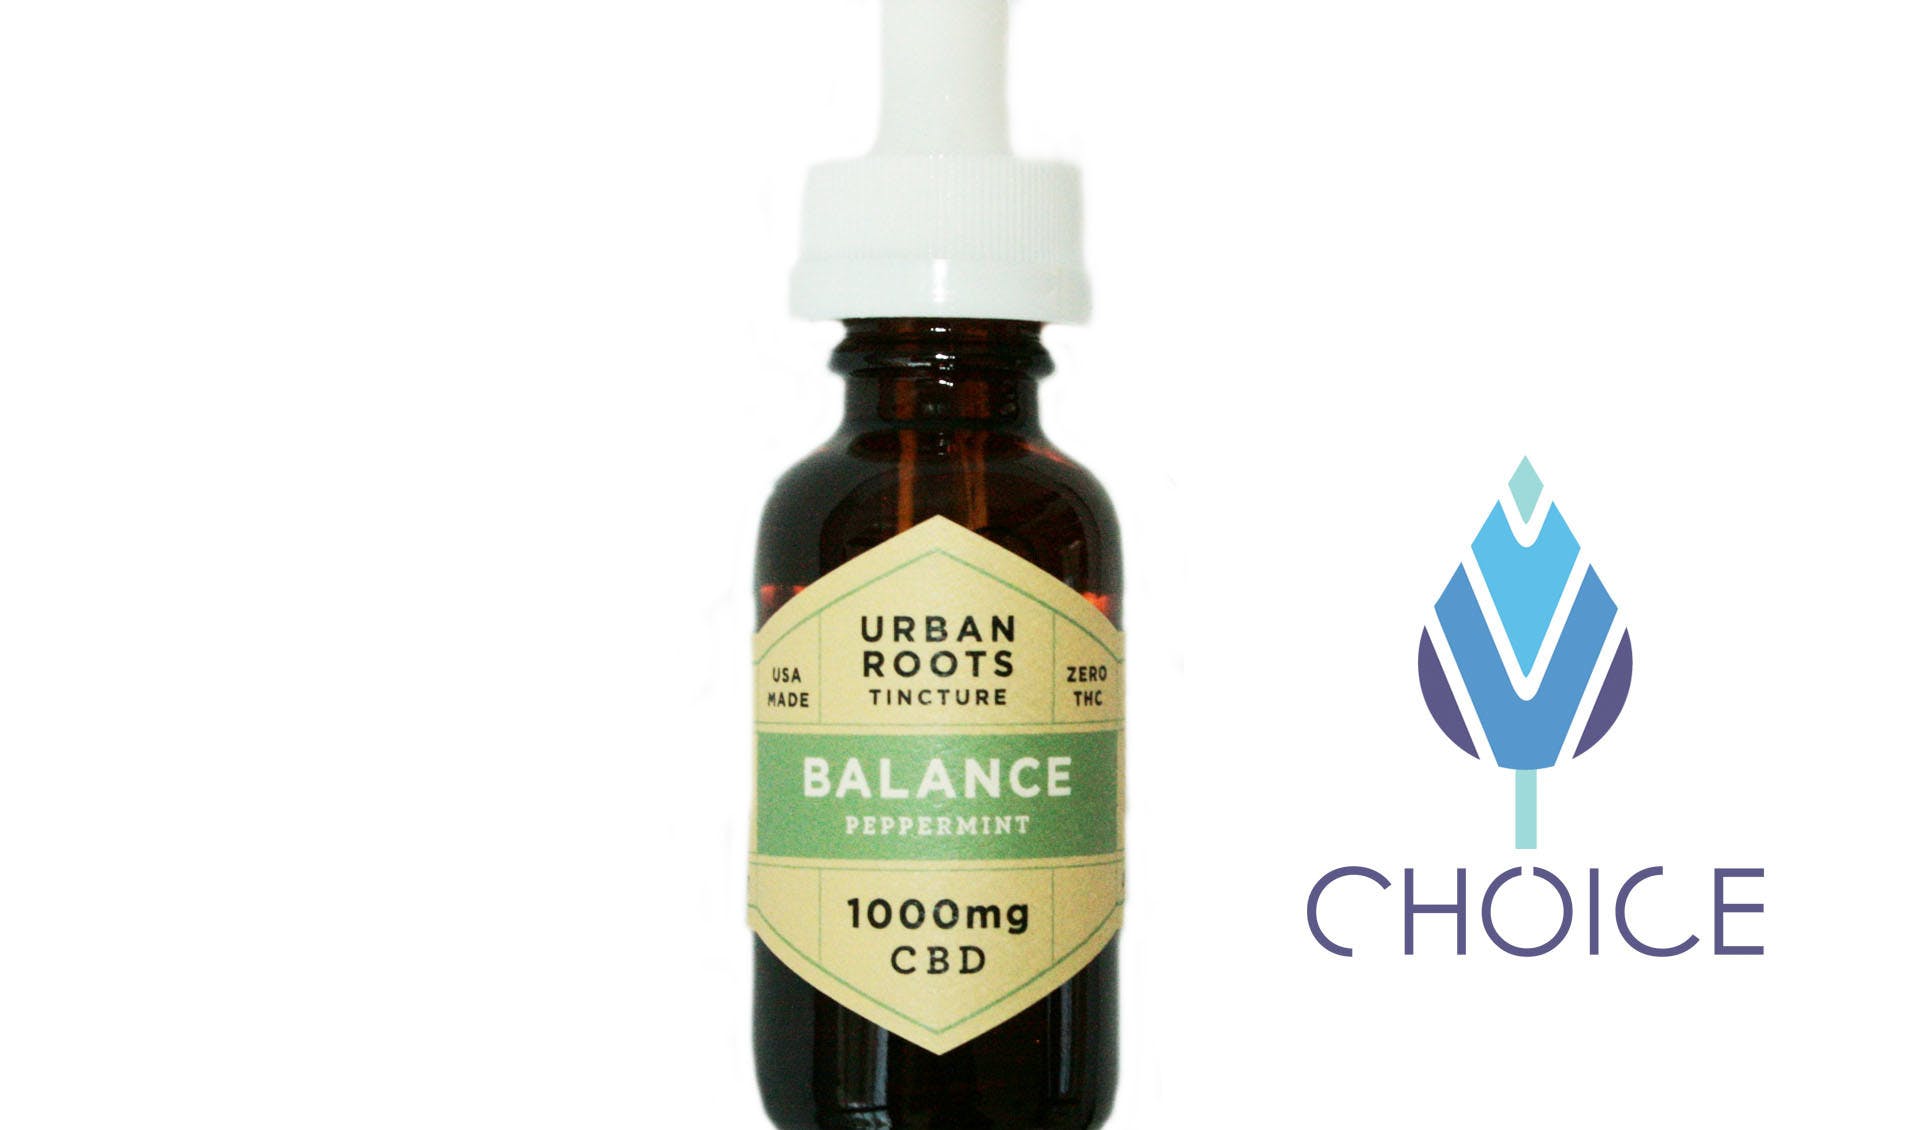 tincture-1000mg-balance-tincture-by-urban-roots